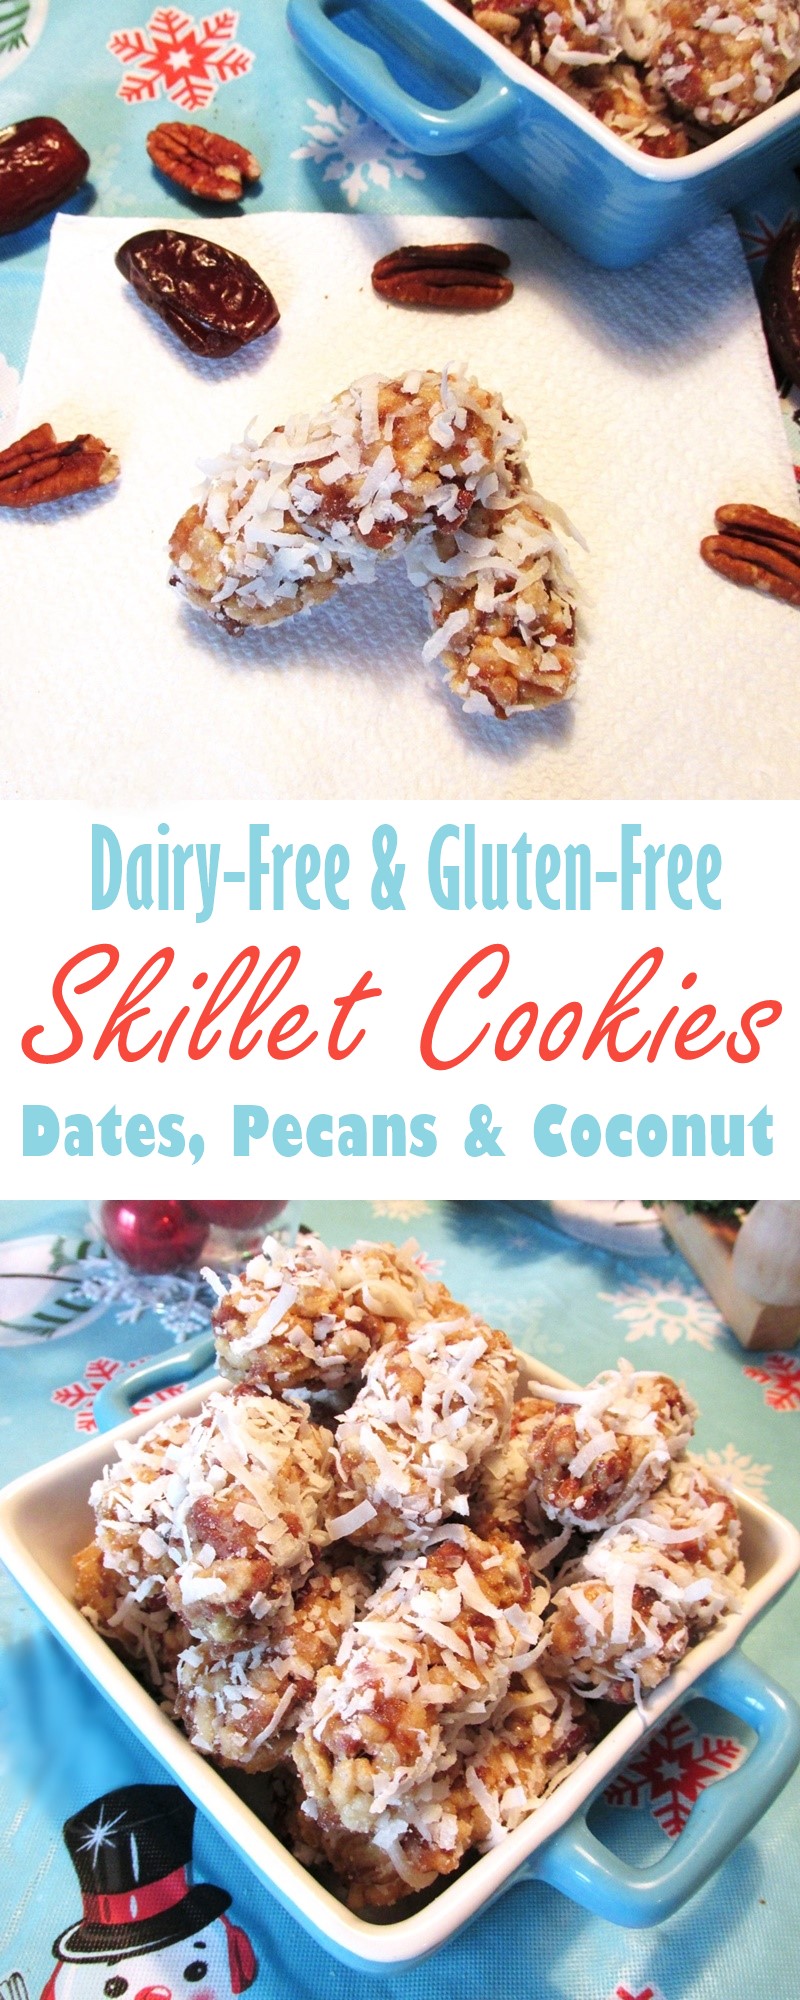 Skillet Cookies Recipe with Dates, Pecans and Coconut (Dairy-free, Gluten-free)